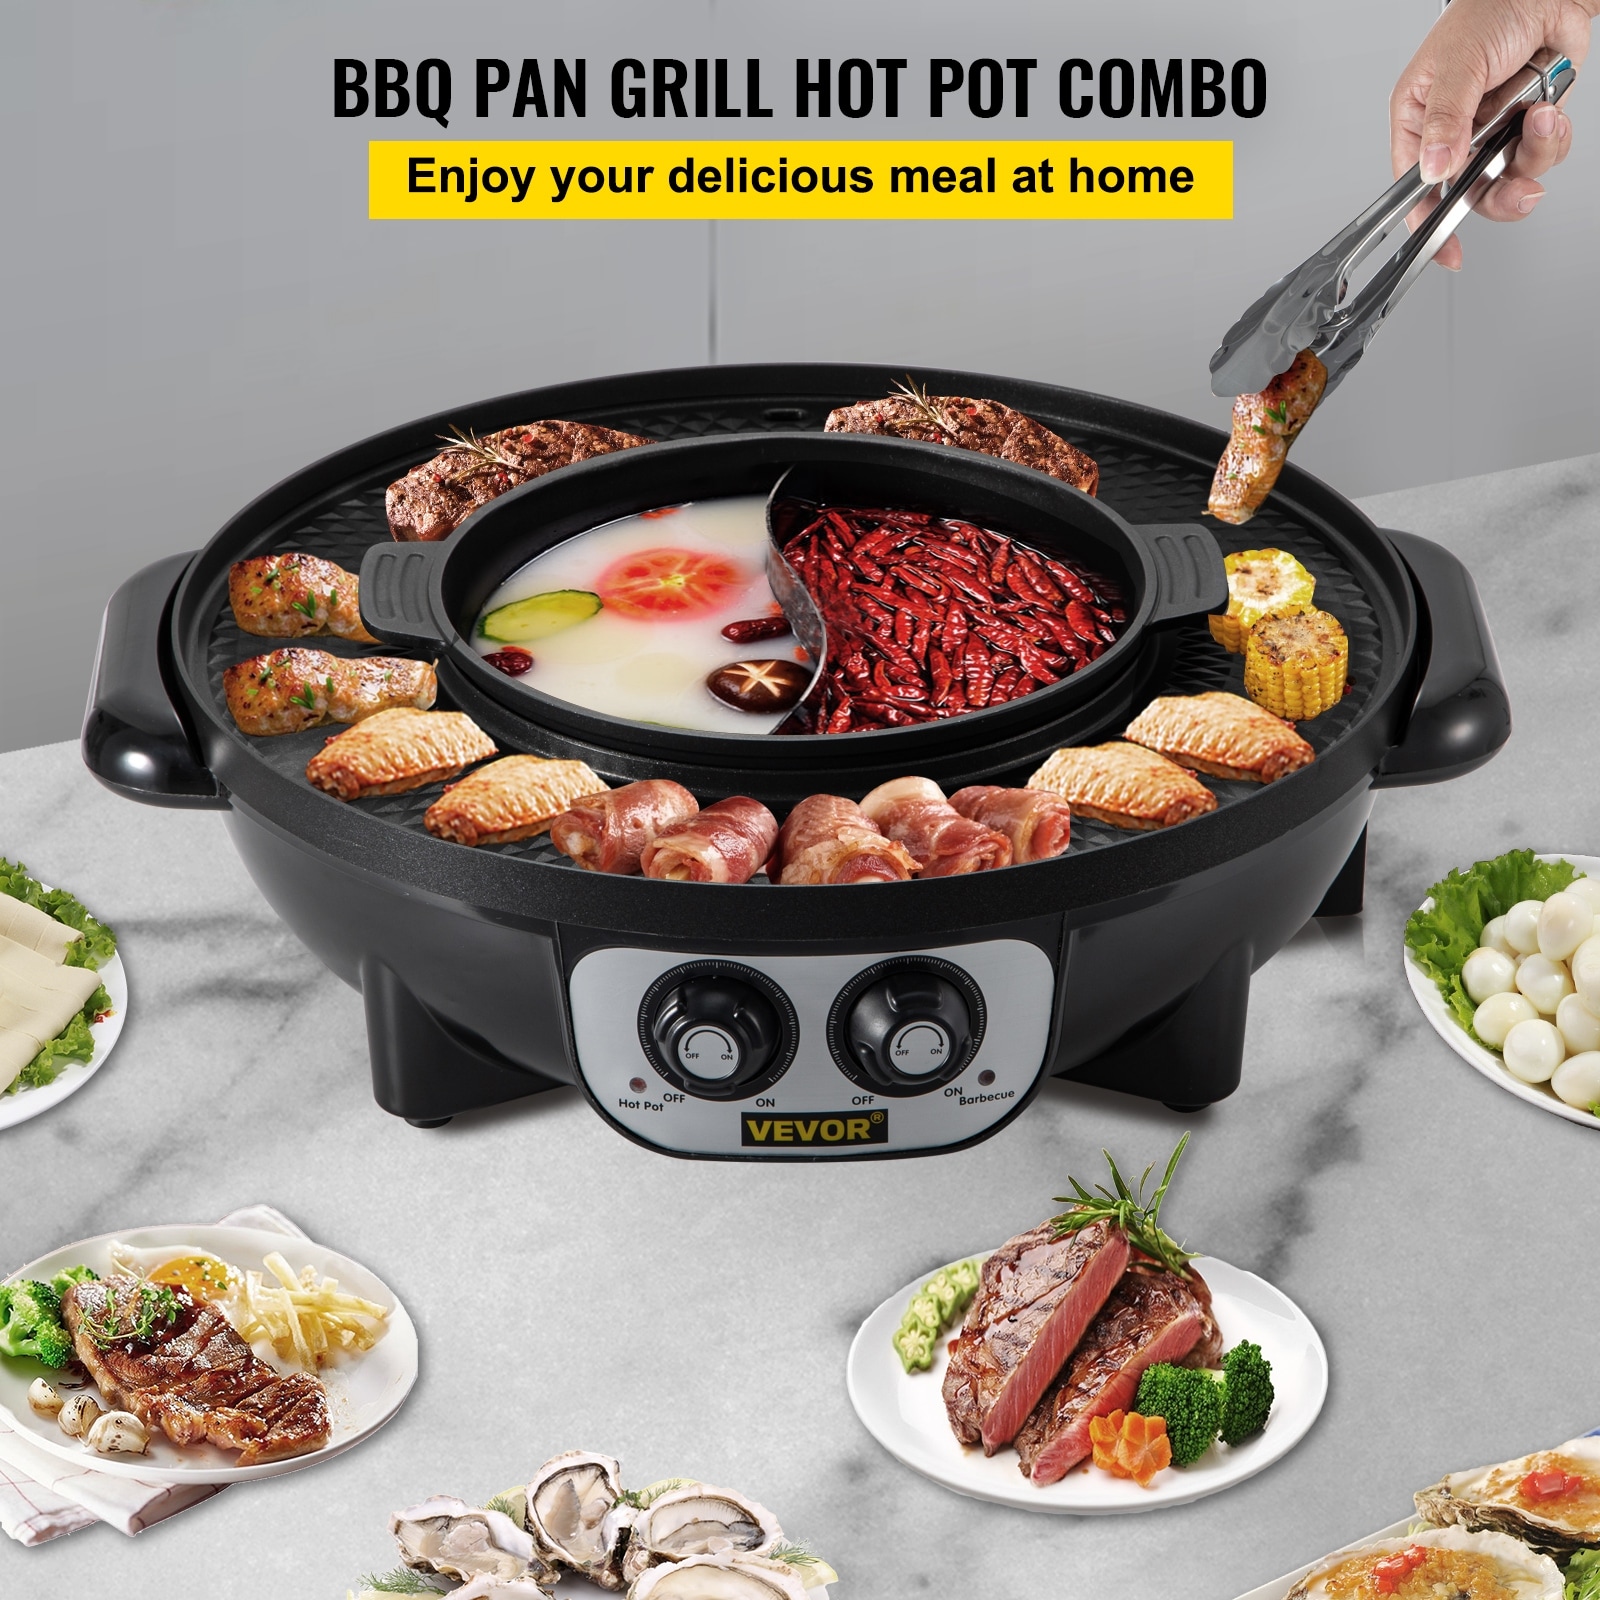 VEVOR 2 in 1 Electric Grill and Hot Pot BBQ Pan Grill and Hot Pot Multifunctional Teppanyaki Grill Pot with Dual Temp Control - 26.4 x 11 x 6.7 inch PC-8002